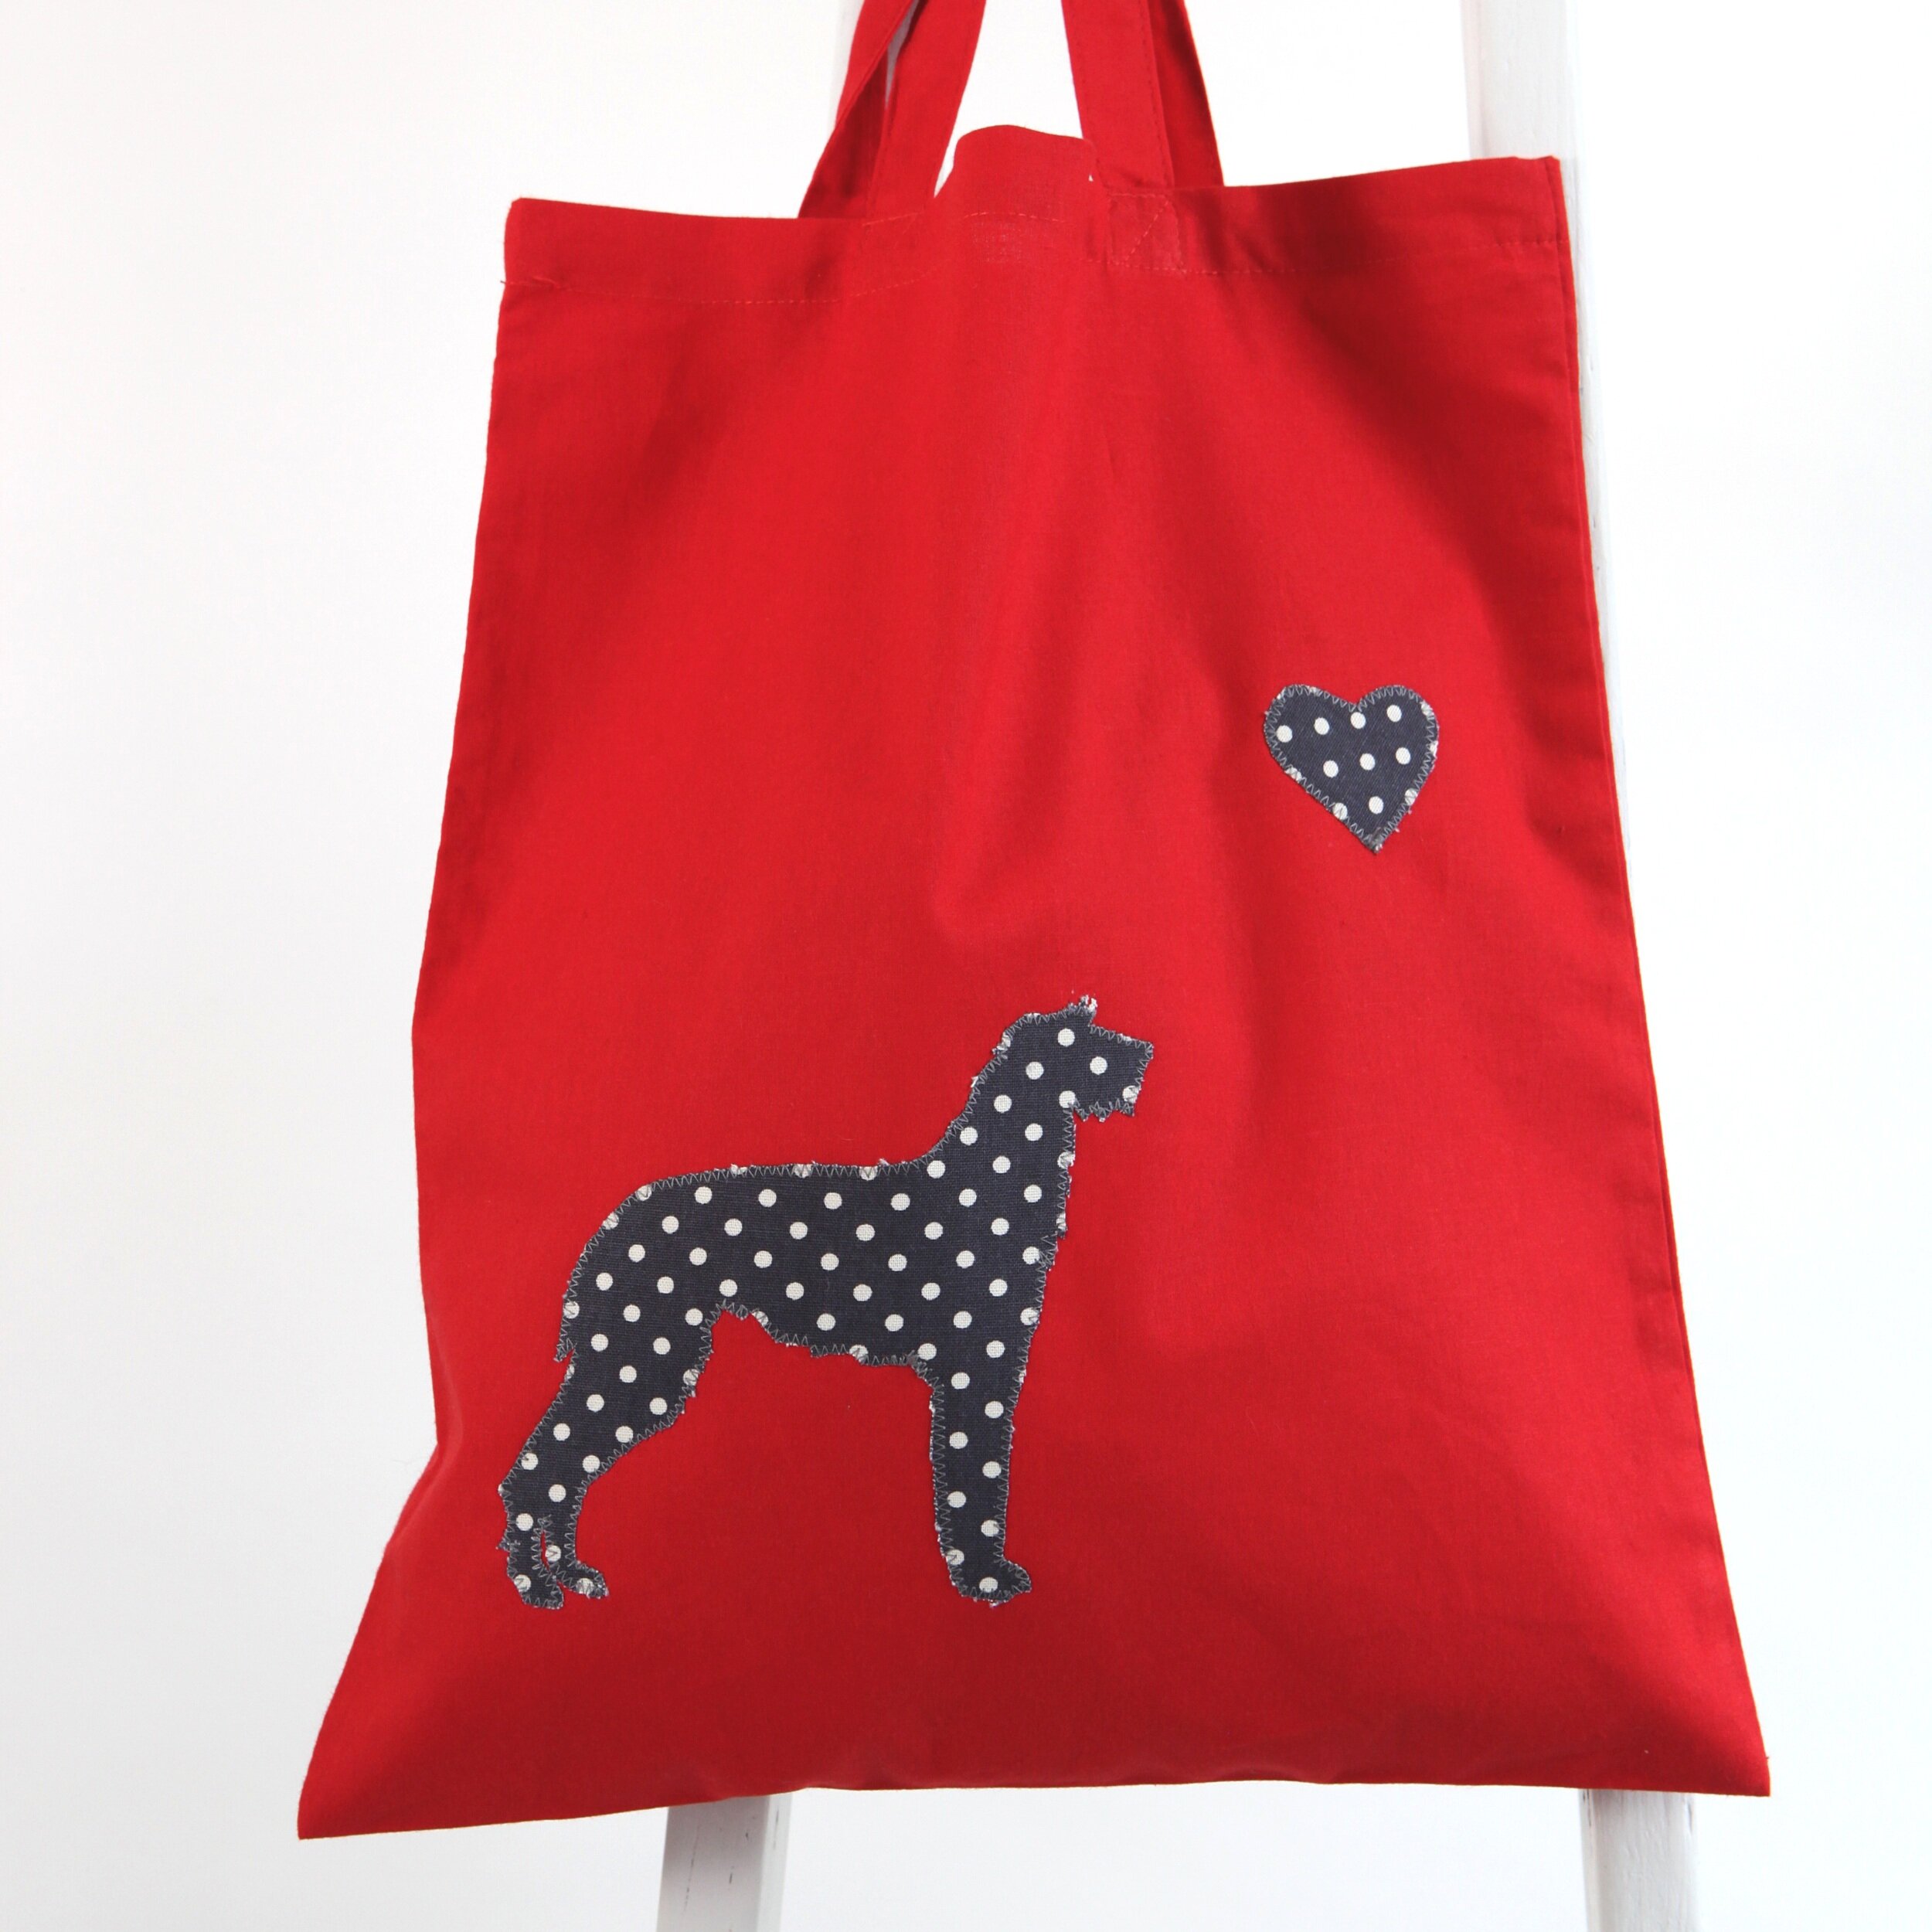 Tote+bag+with+applique+%28red%29.jpg